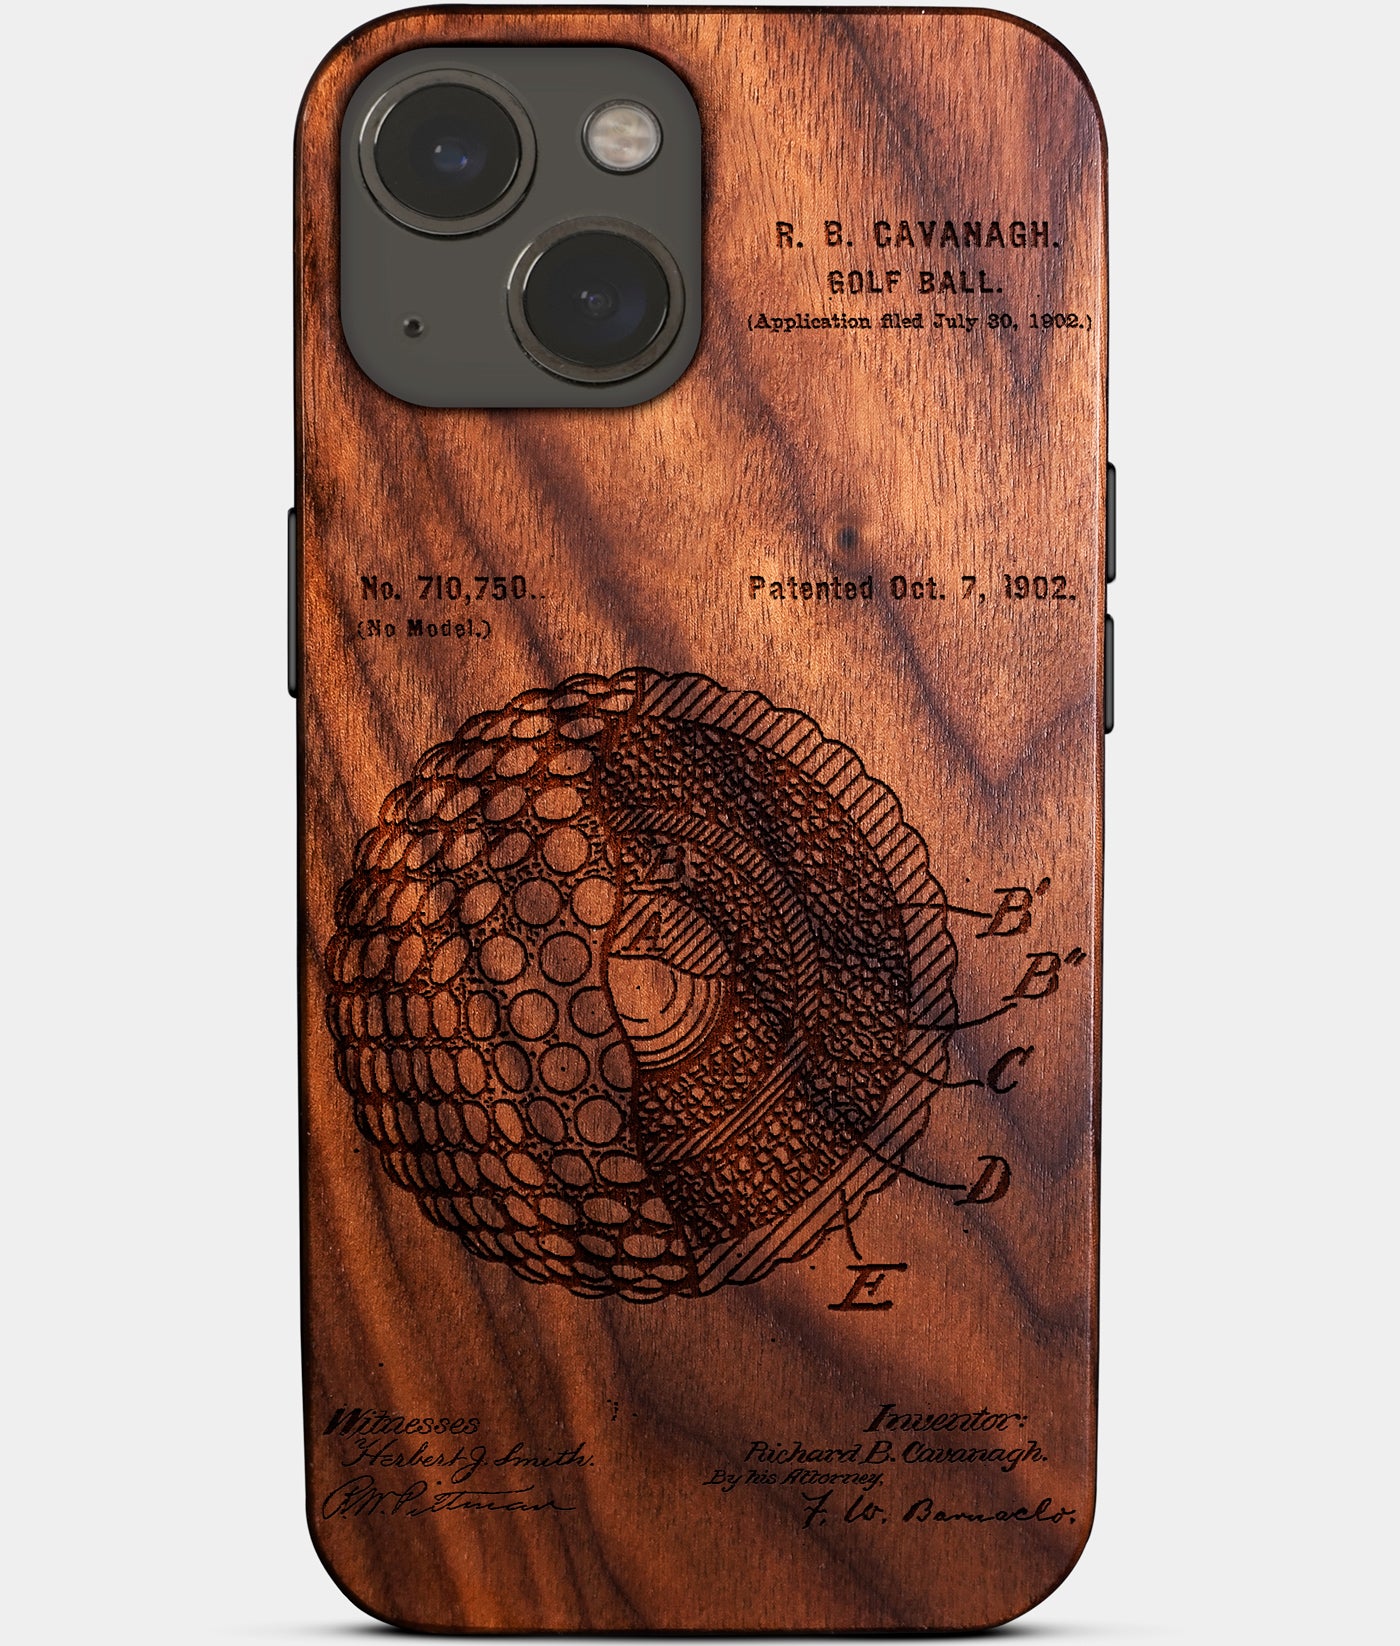 Custom Golf iPhone 14 Cases Golf Ball Personalized Golf Gifts For Men 2022 Best Golf Christmas Gifts Best Country Club Gifts Carved Wood Unusual Golf Gift For Him Monogrammed iPhone 14 Covers